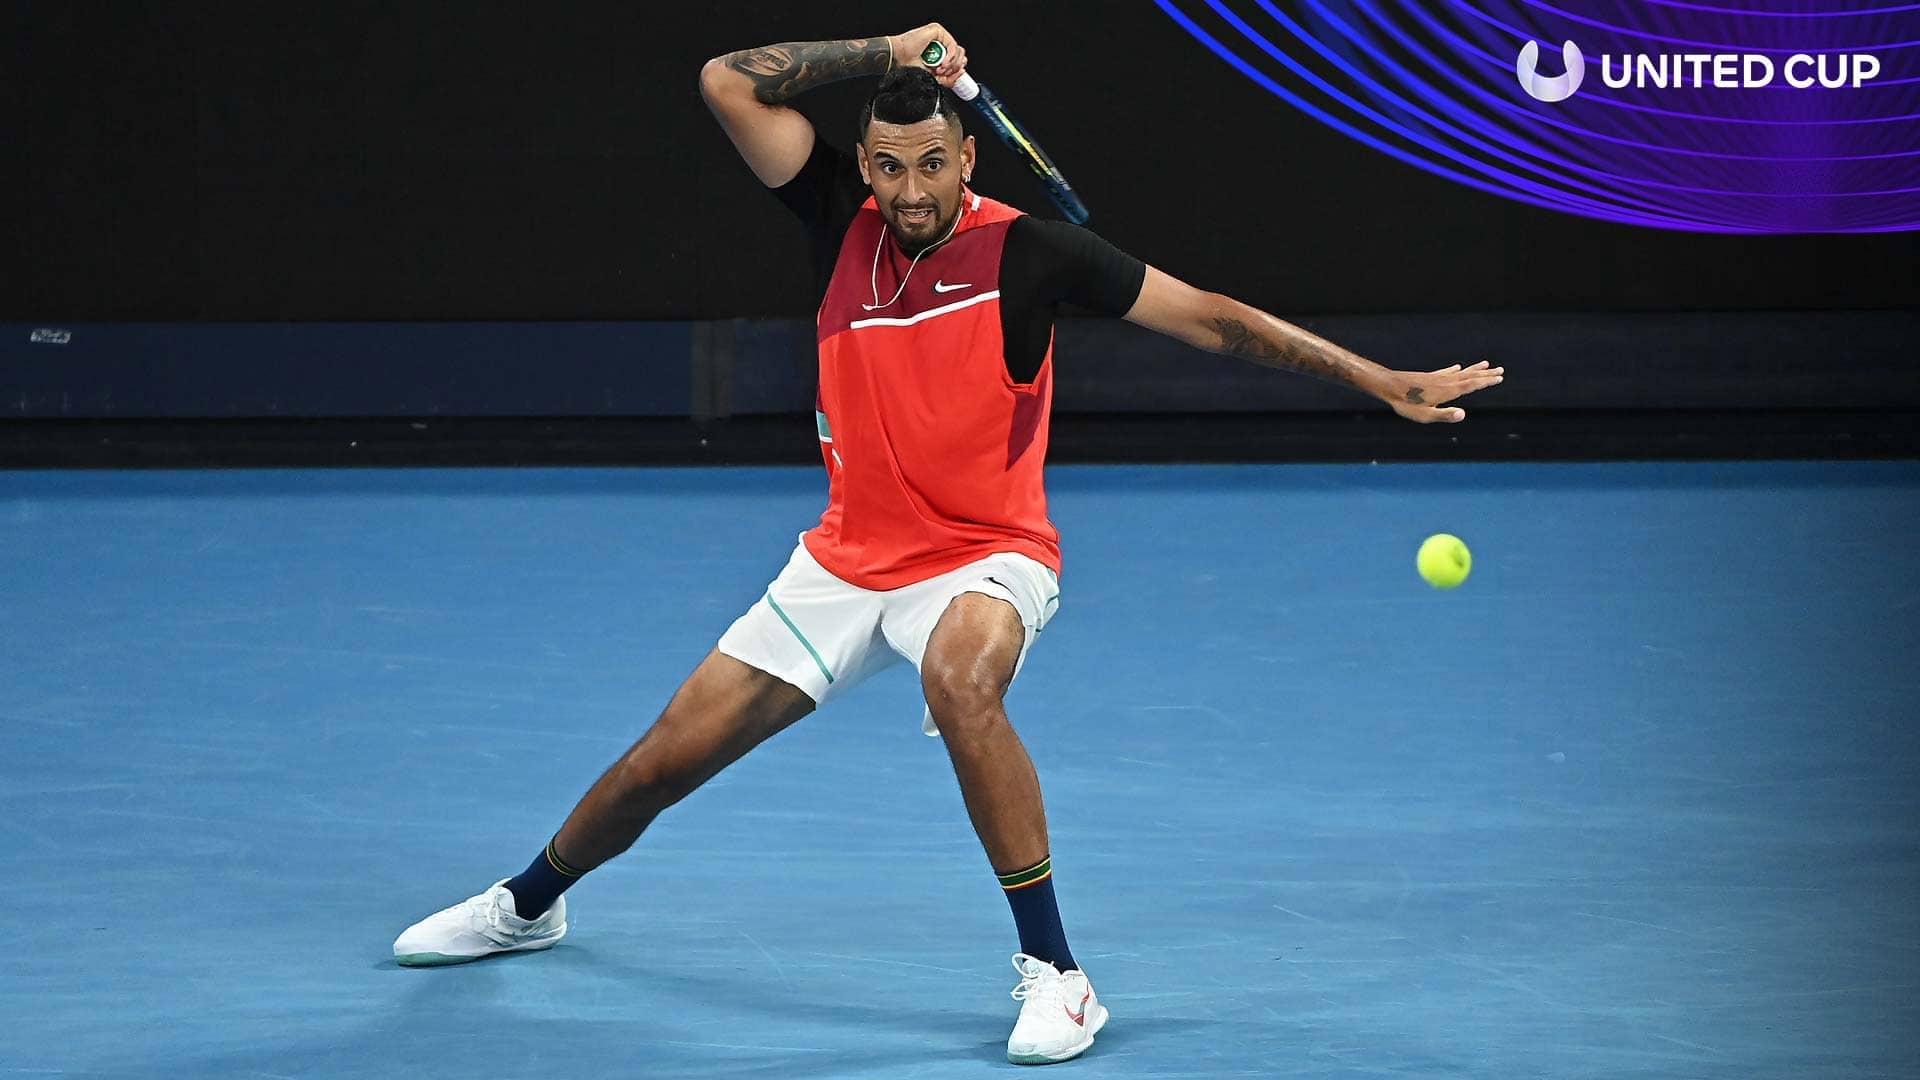 Nick Kyrgios in action at the 2022 Australian Open.